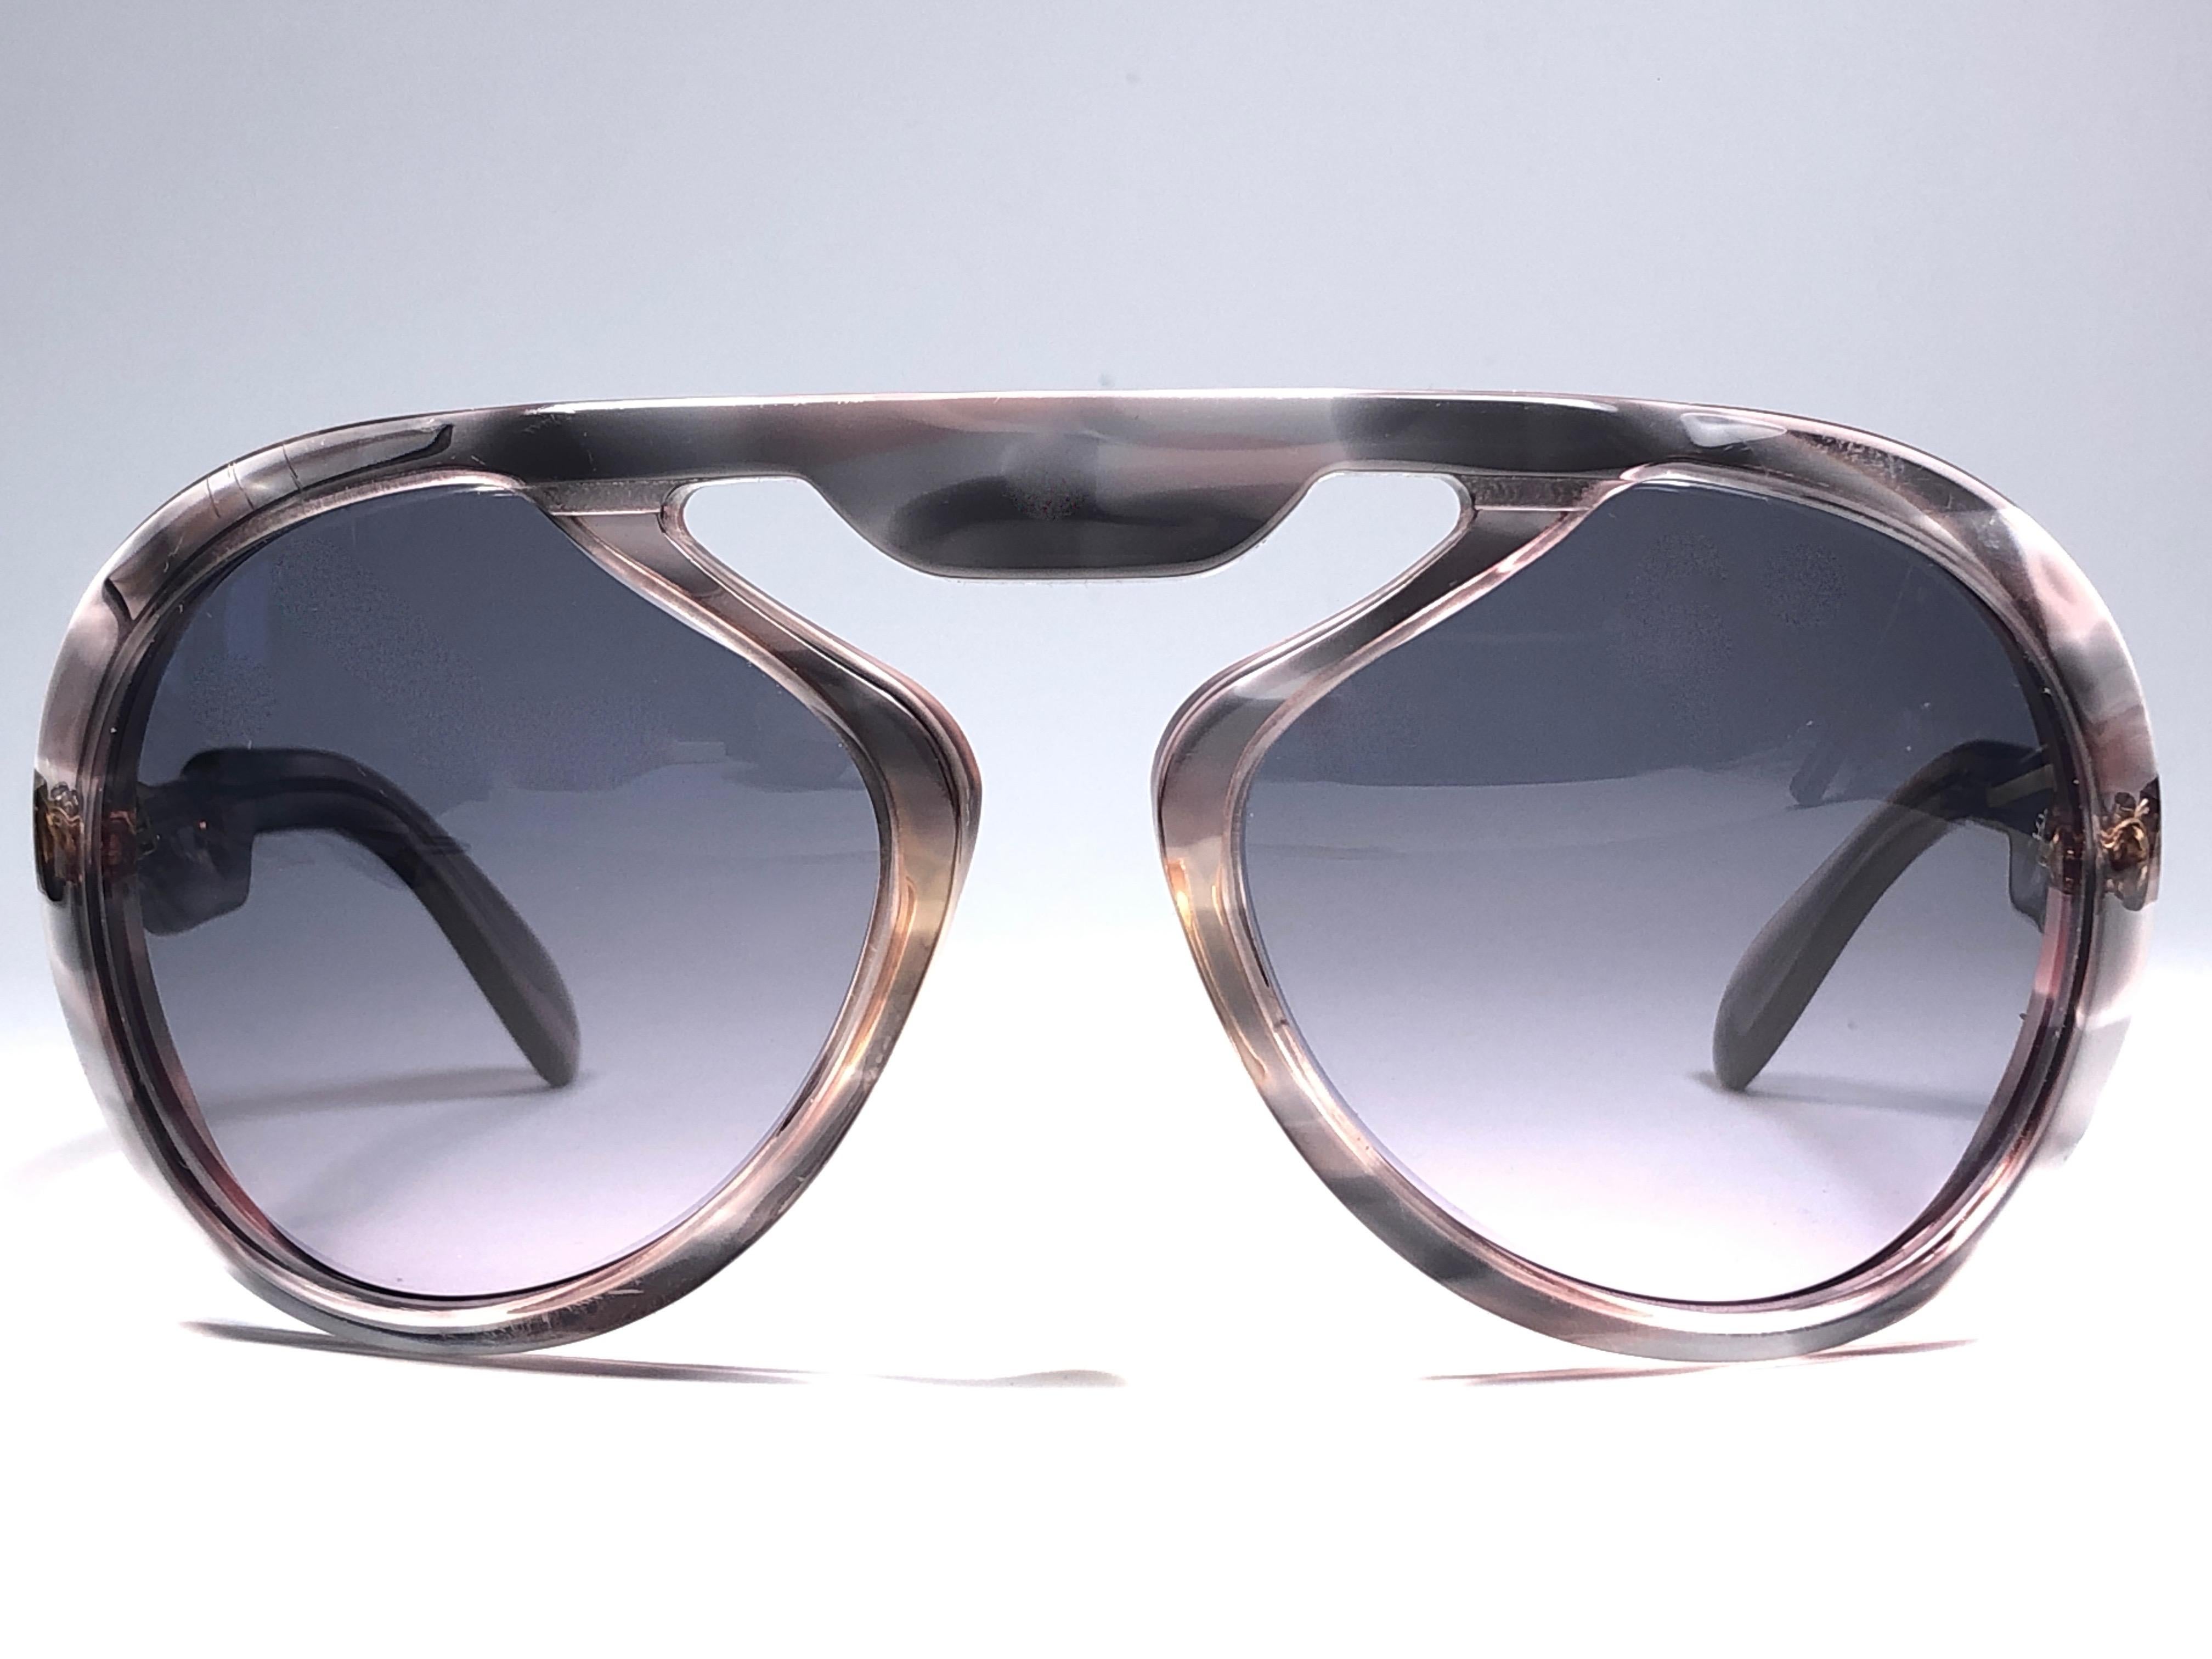 New Vintage Silhouette Clear Oversized Silver Funk Germany 1970 Sunglasses  1